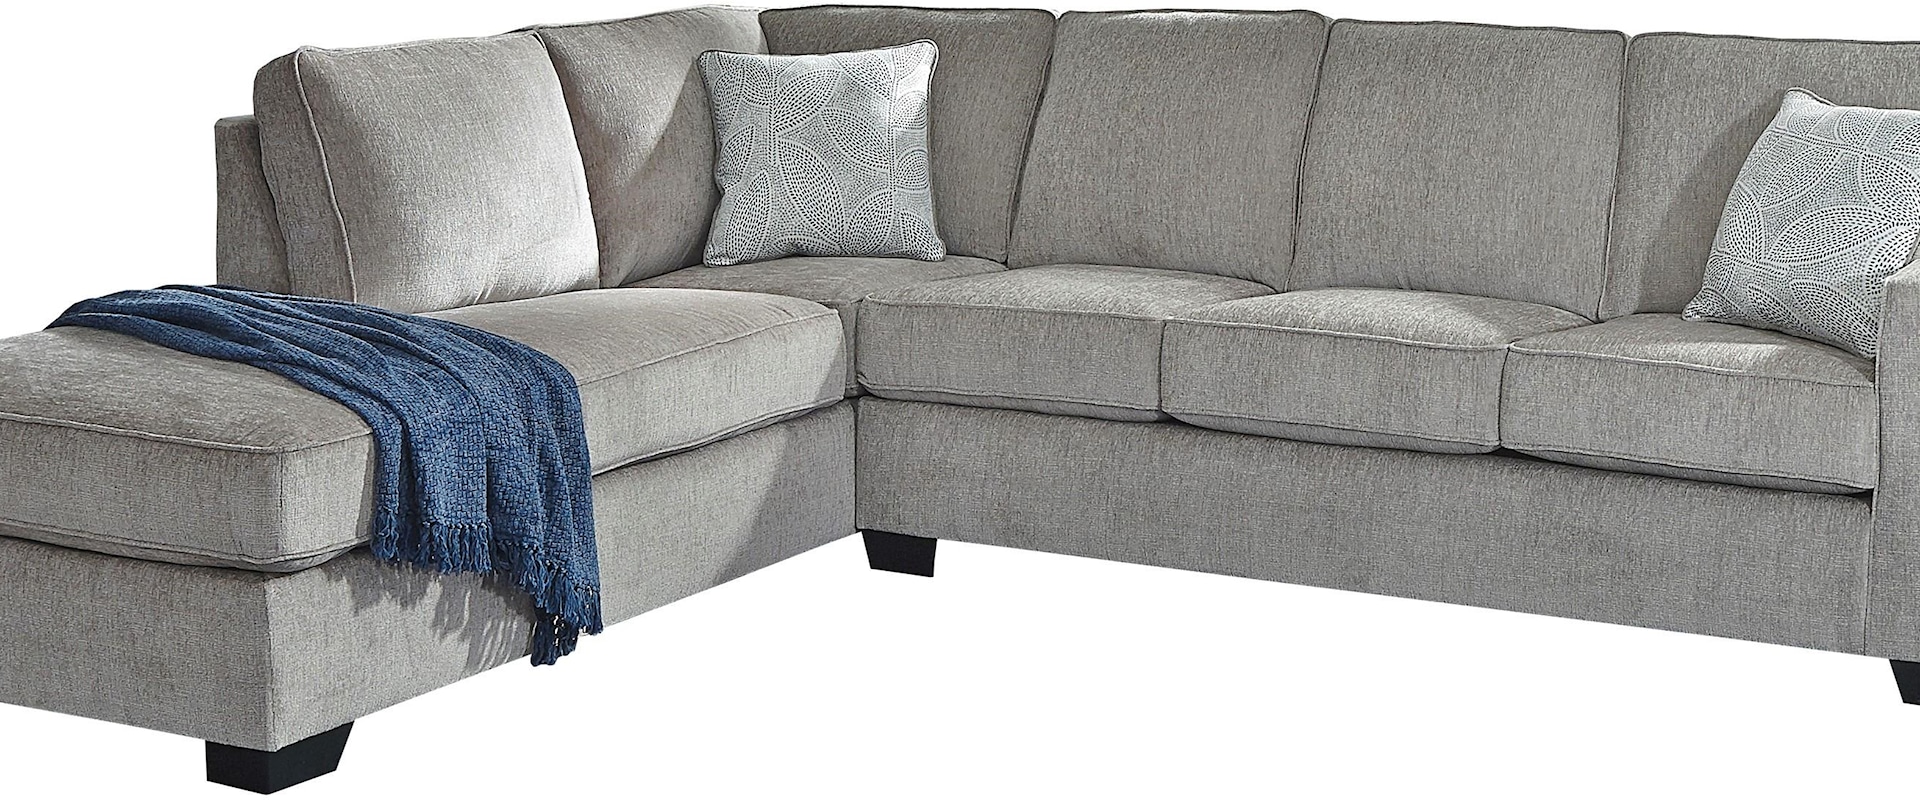 2 Piece Right Arm Facing Sofa, Left Arm Facing Chaise Sectional Sofa and Chair Set